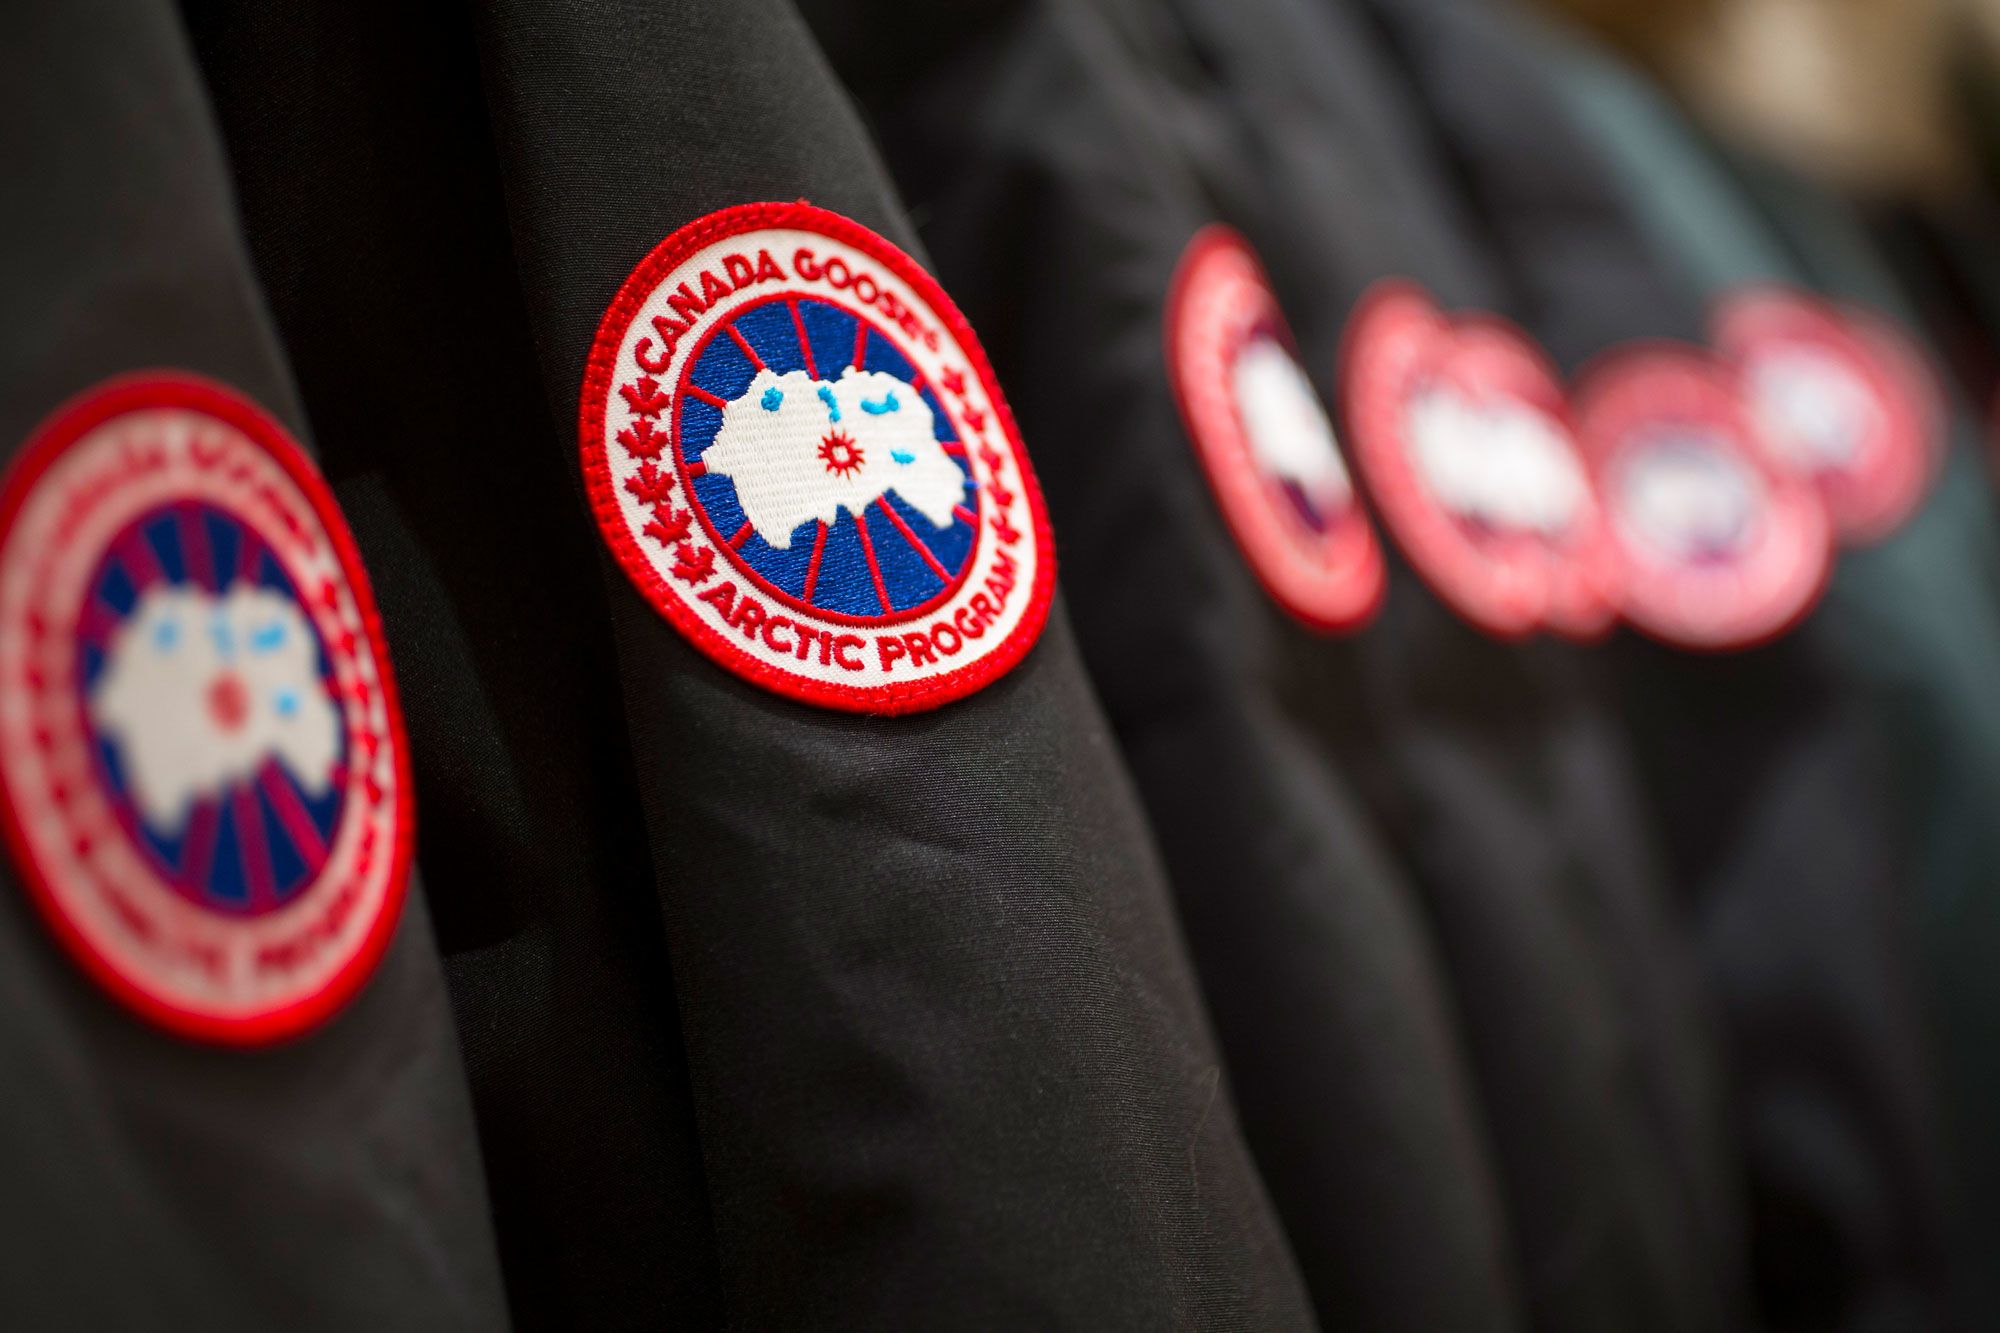 Canada Goose reports fourth quarter fiscal 2019 earnings